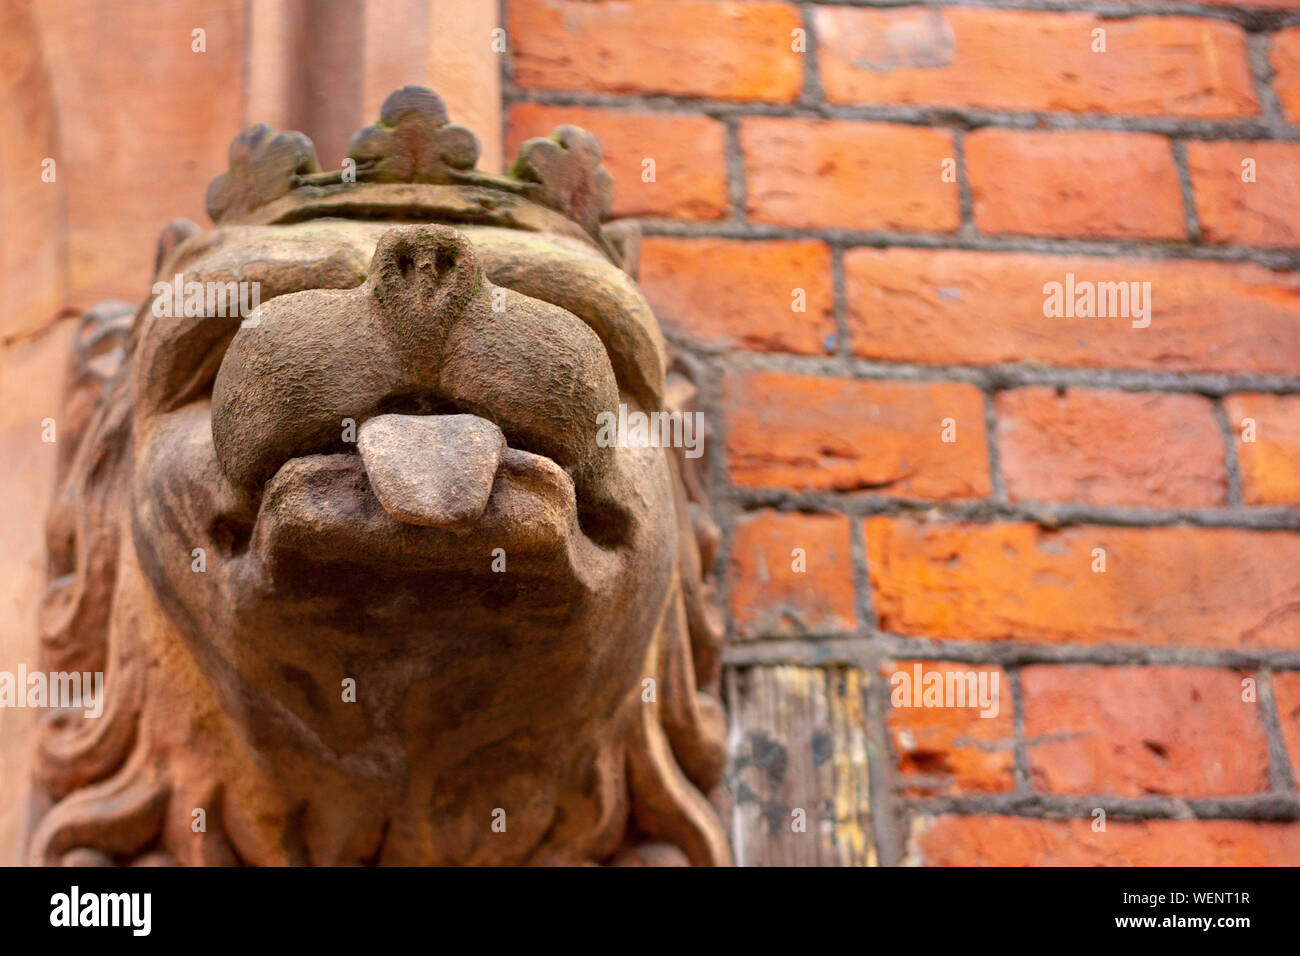 Crowned lion or dog carved as a stone head as a gargoyle - a cheeky guardian with outstretched tongue Stock Photo